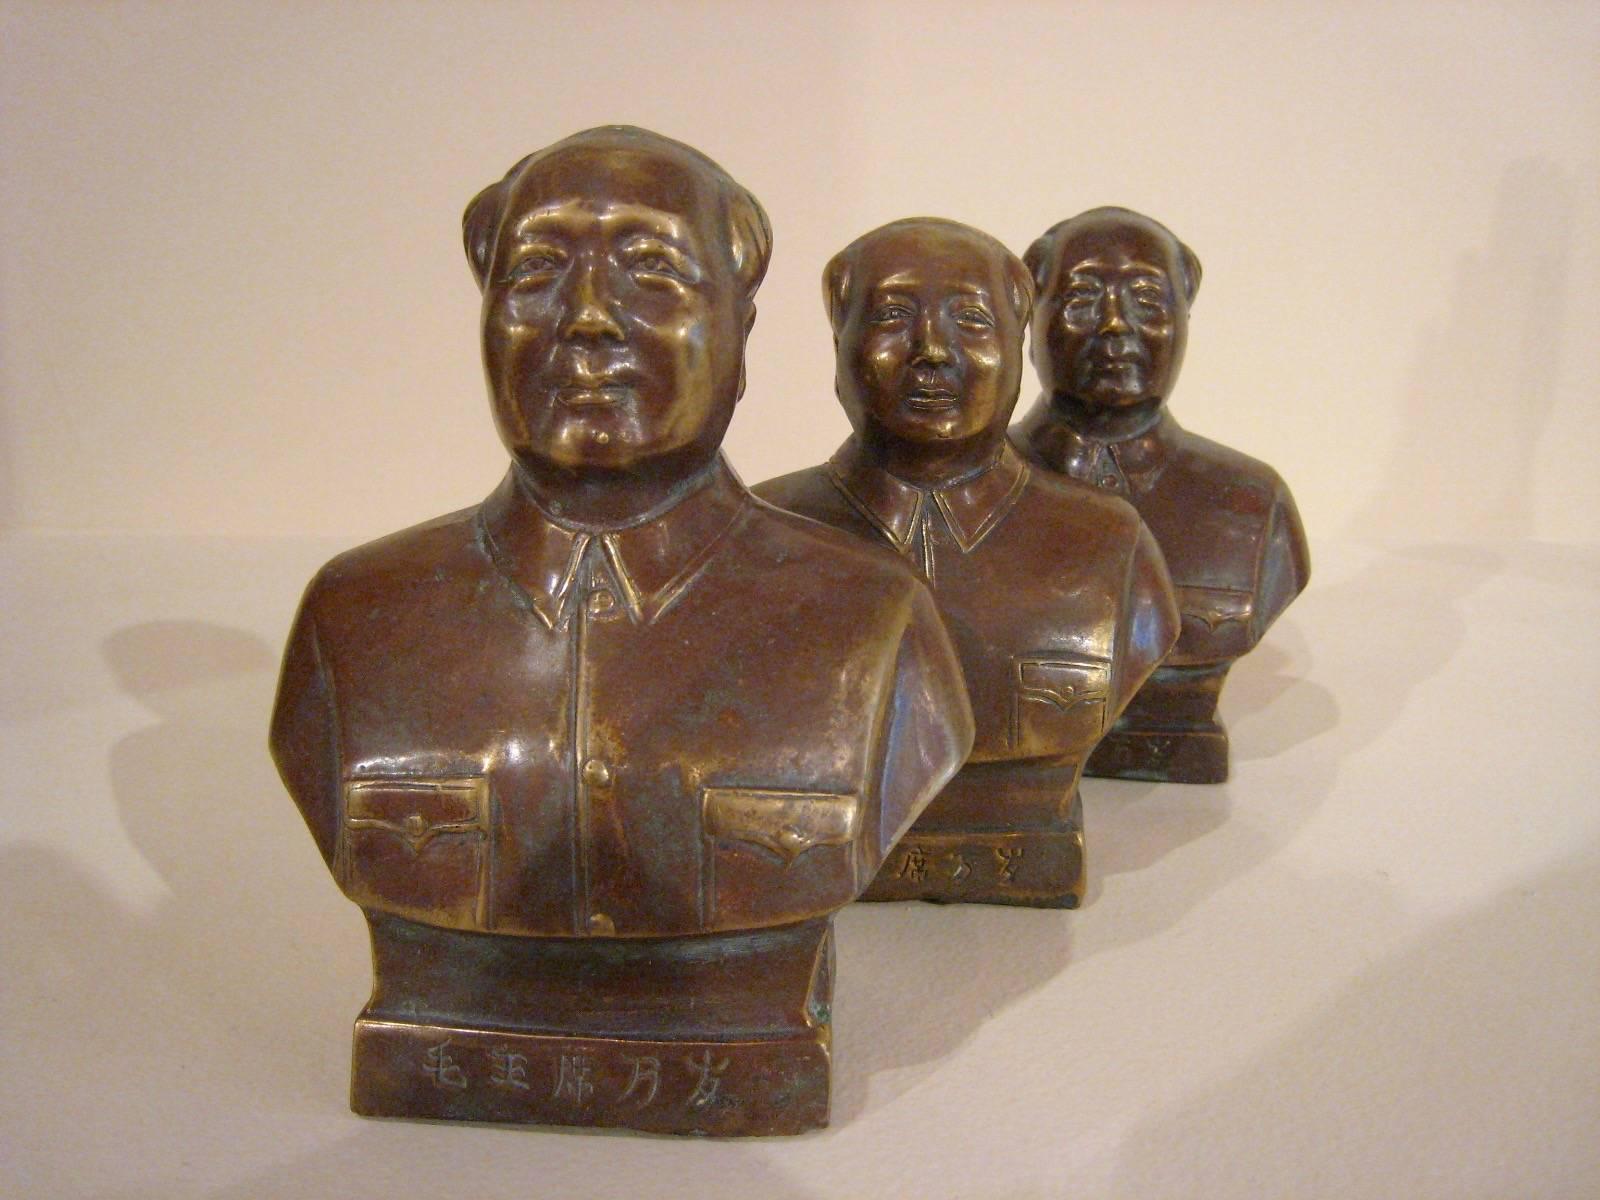 Three Classic copper busts of Chairman Mao from the Cultural Revolution period. These were found in many Chinese homes during Mao's reign. A piece of Chinese history, China, circa 1960. Sold individually.